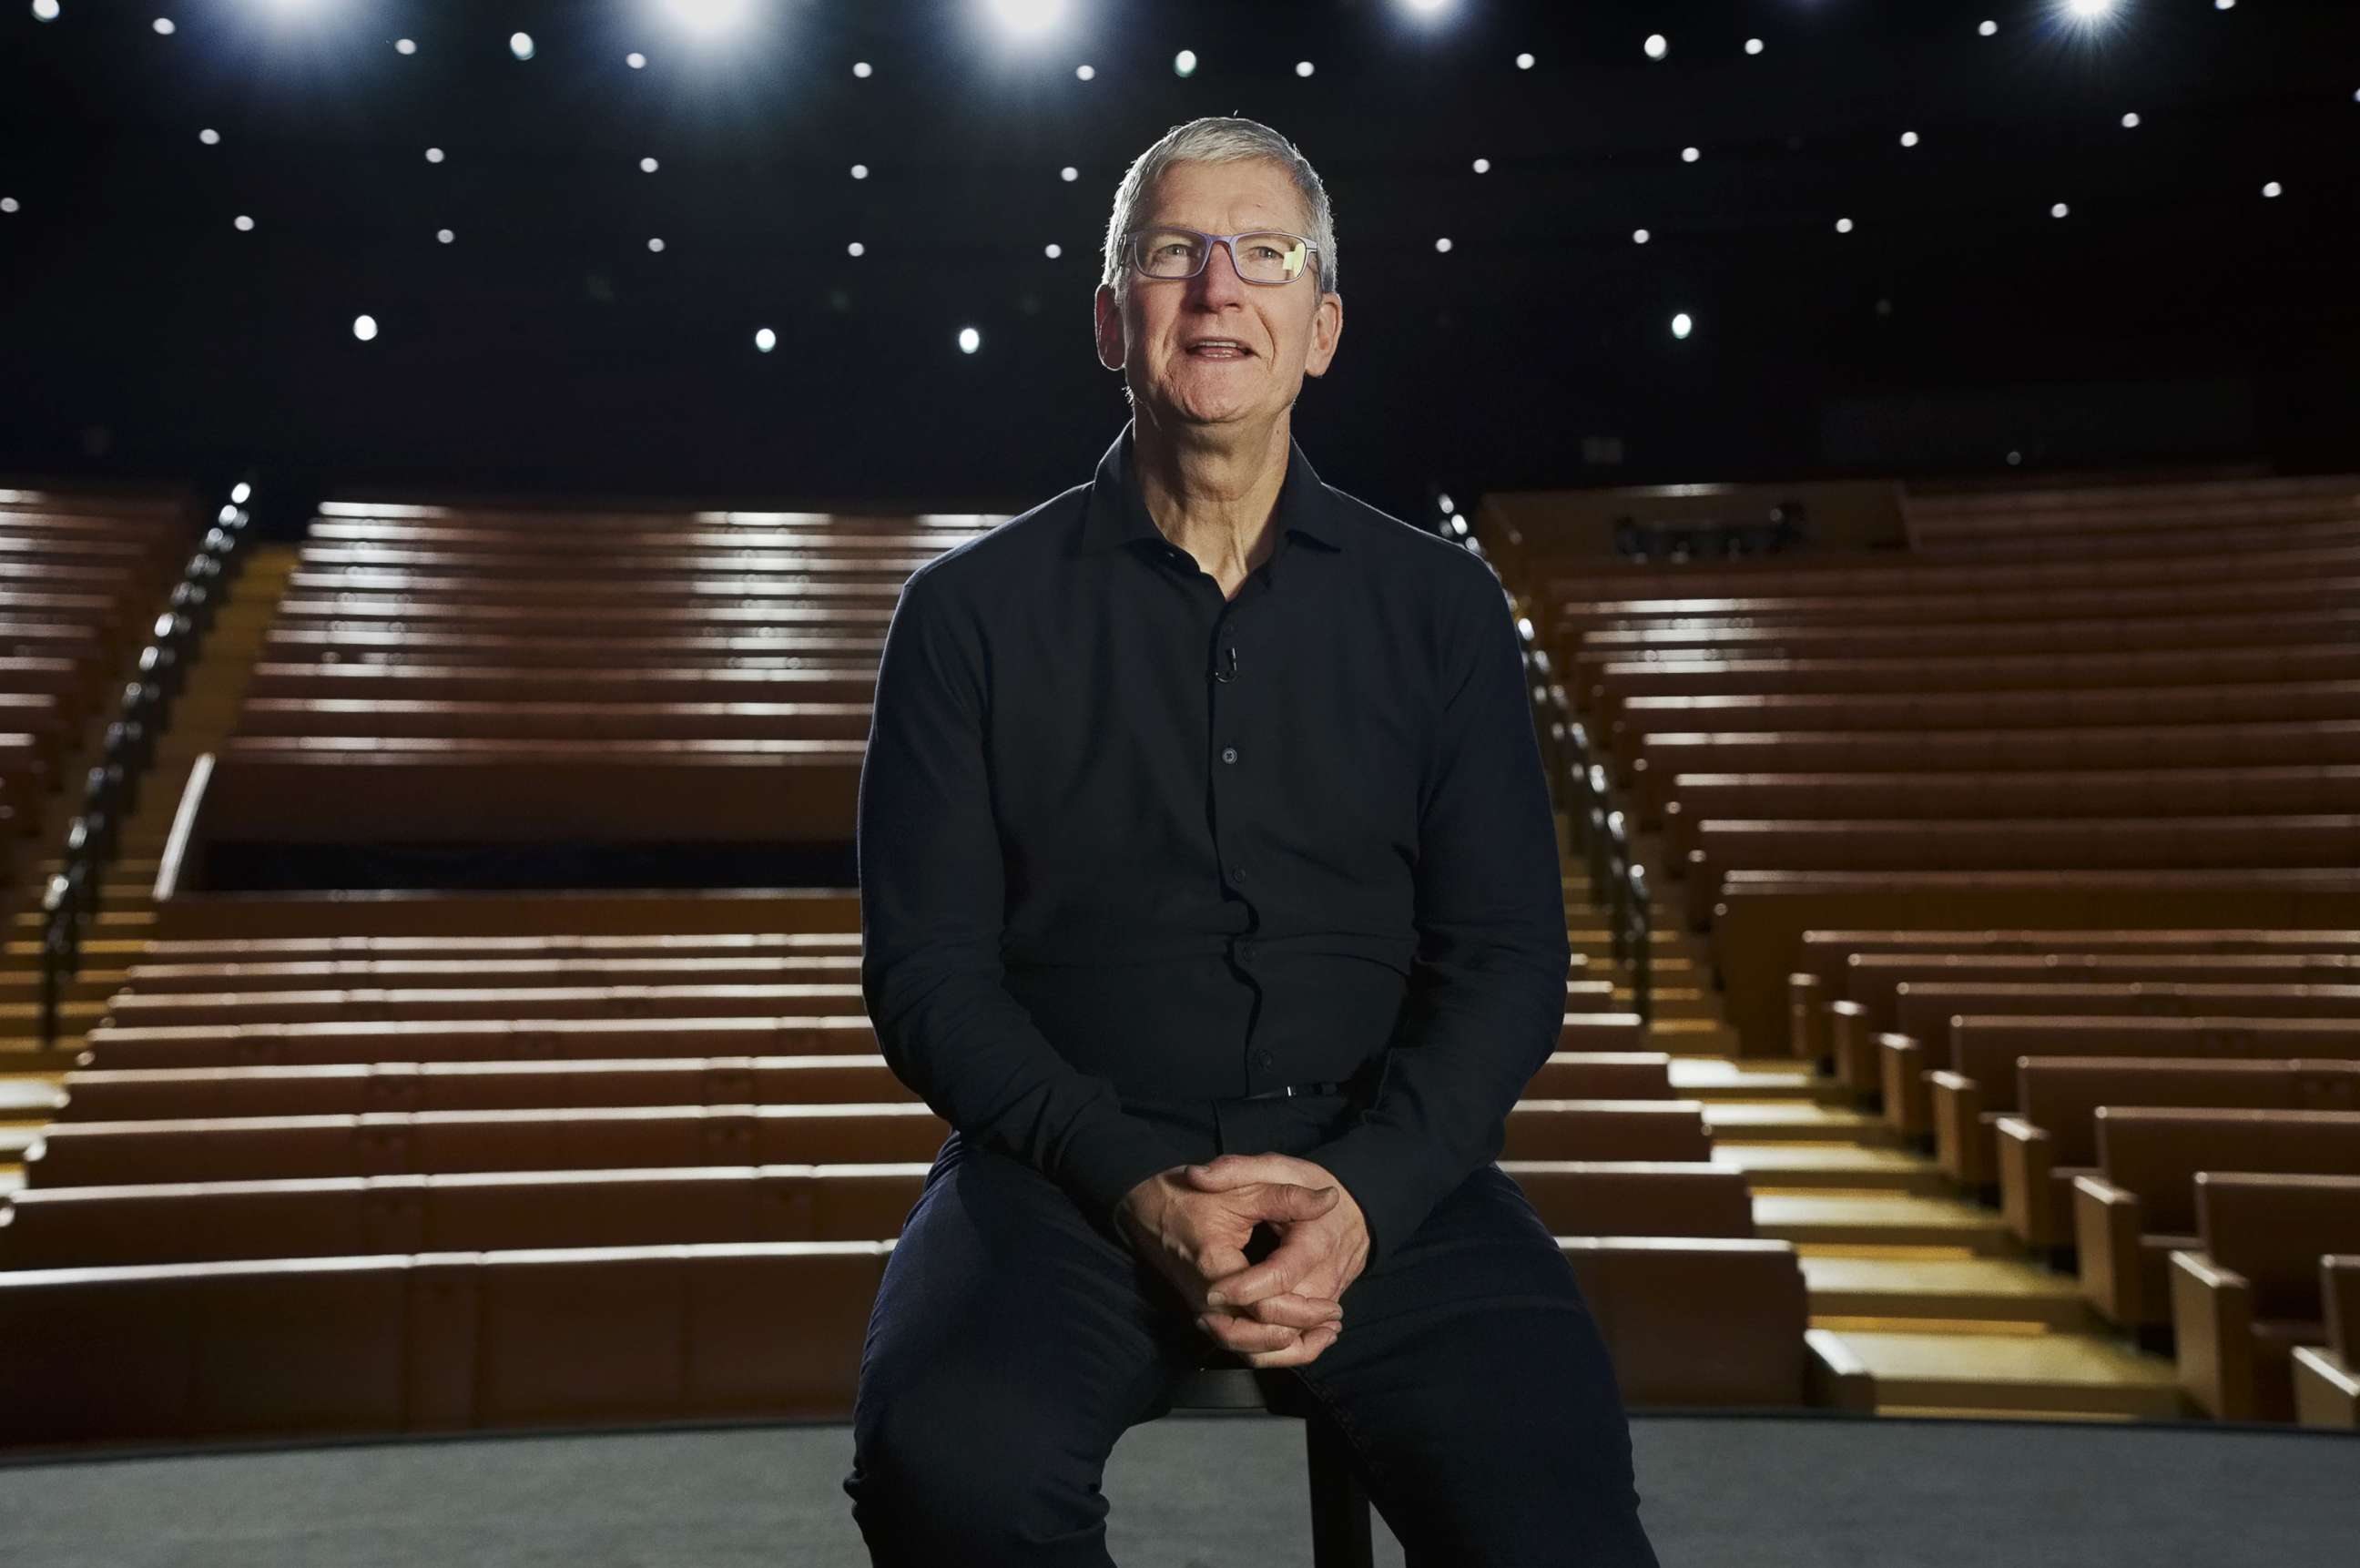 PHOTO: In this handout provided by Apple, CEO Tim Cook delivers the keynote address during the 2020 Apple Worldwide Developers Conference at an empty Steve Jobs Theater June 22, 2020, in Cupertino, Calif.